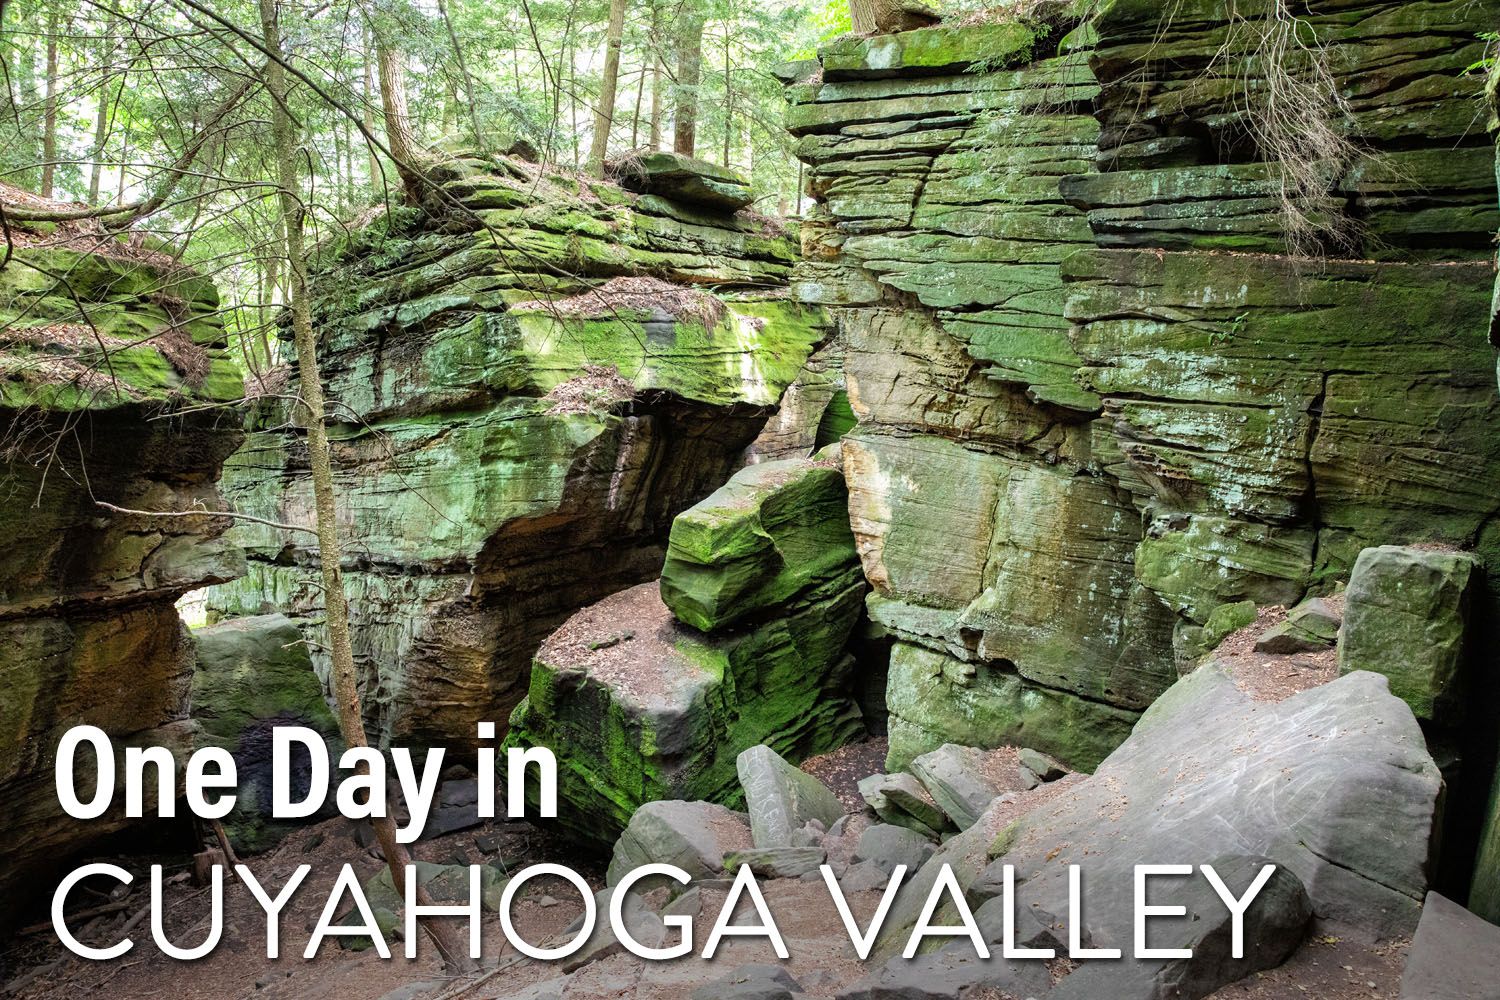 One Day in Cuyahoga Valley